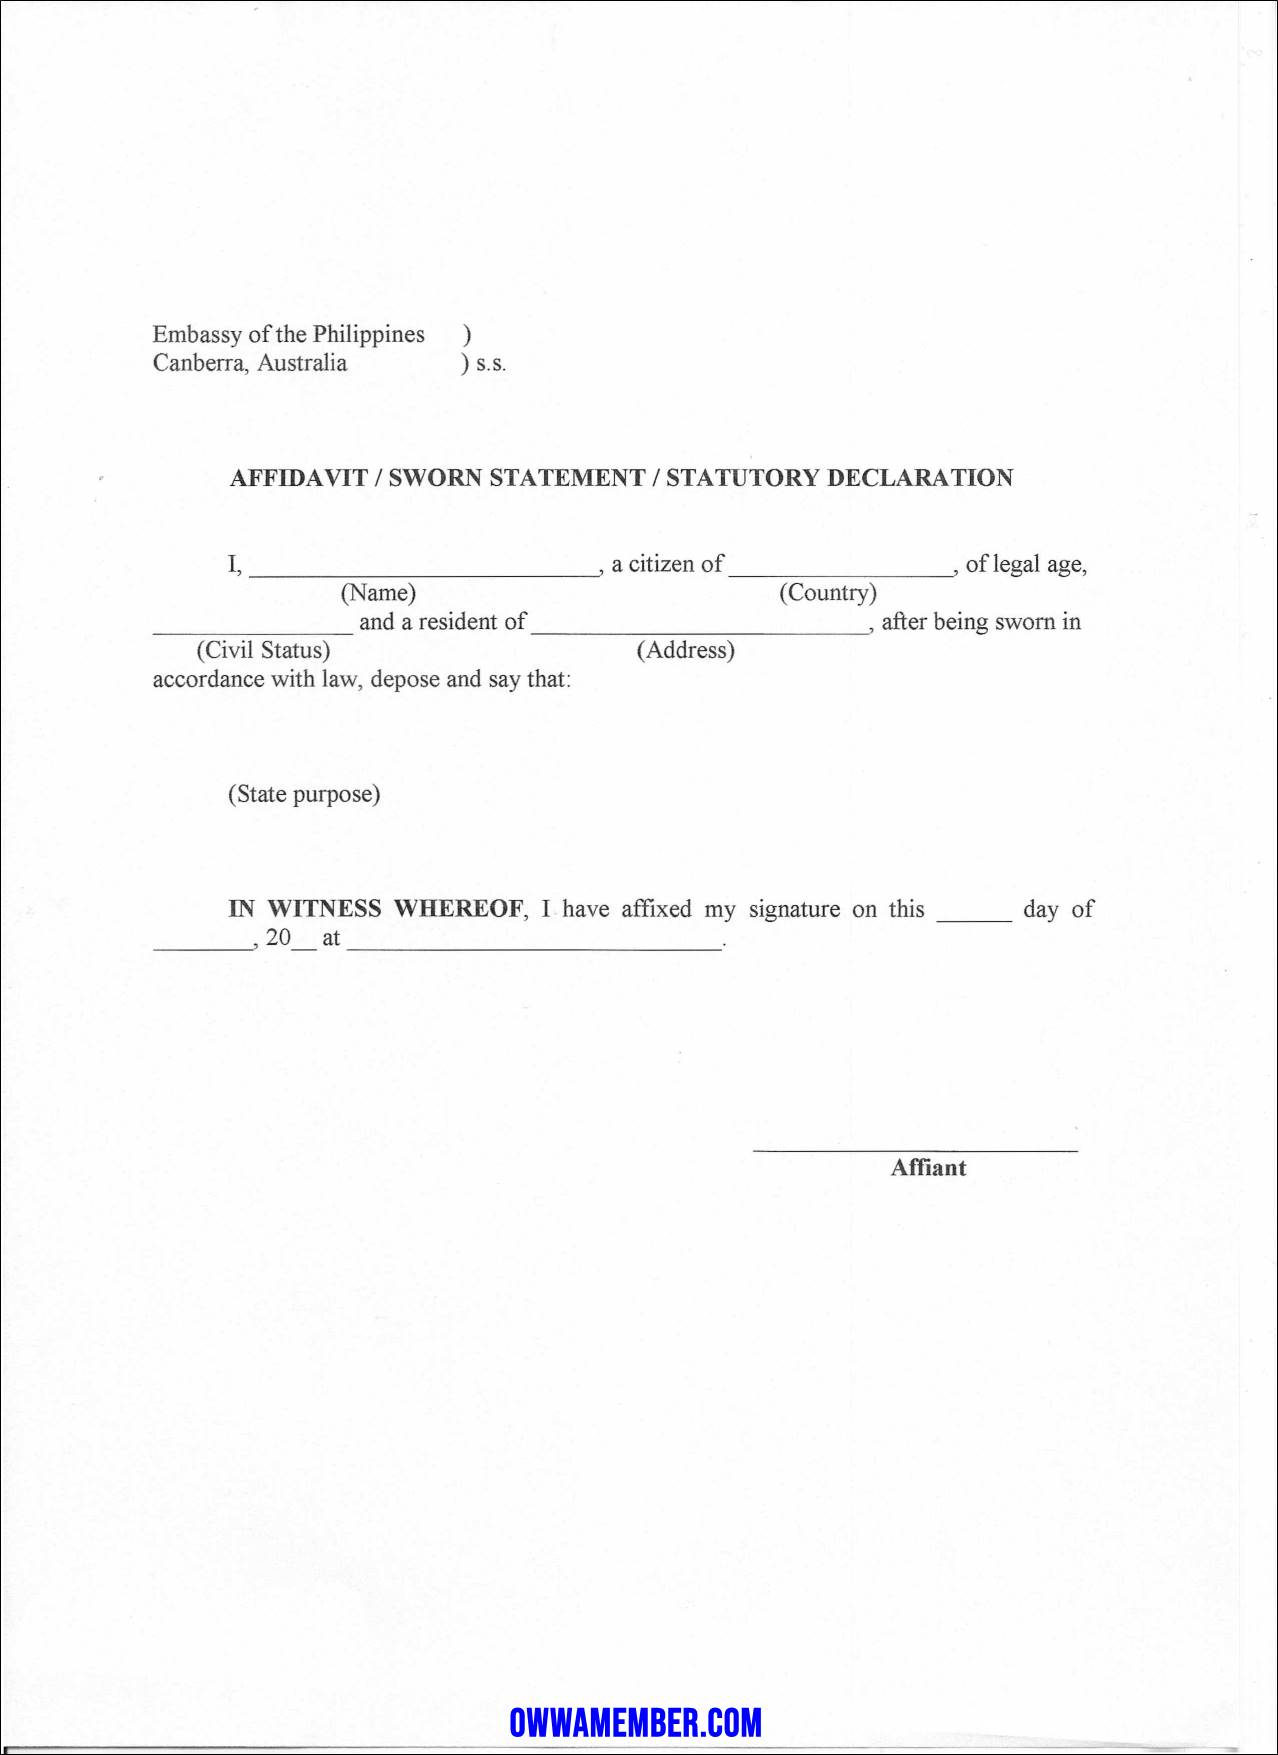 affidavit form notarial in canberra australia template download_page-0001